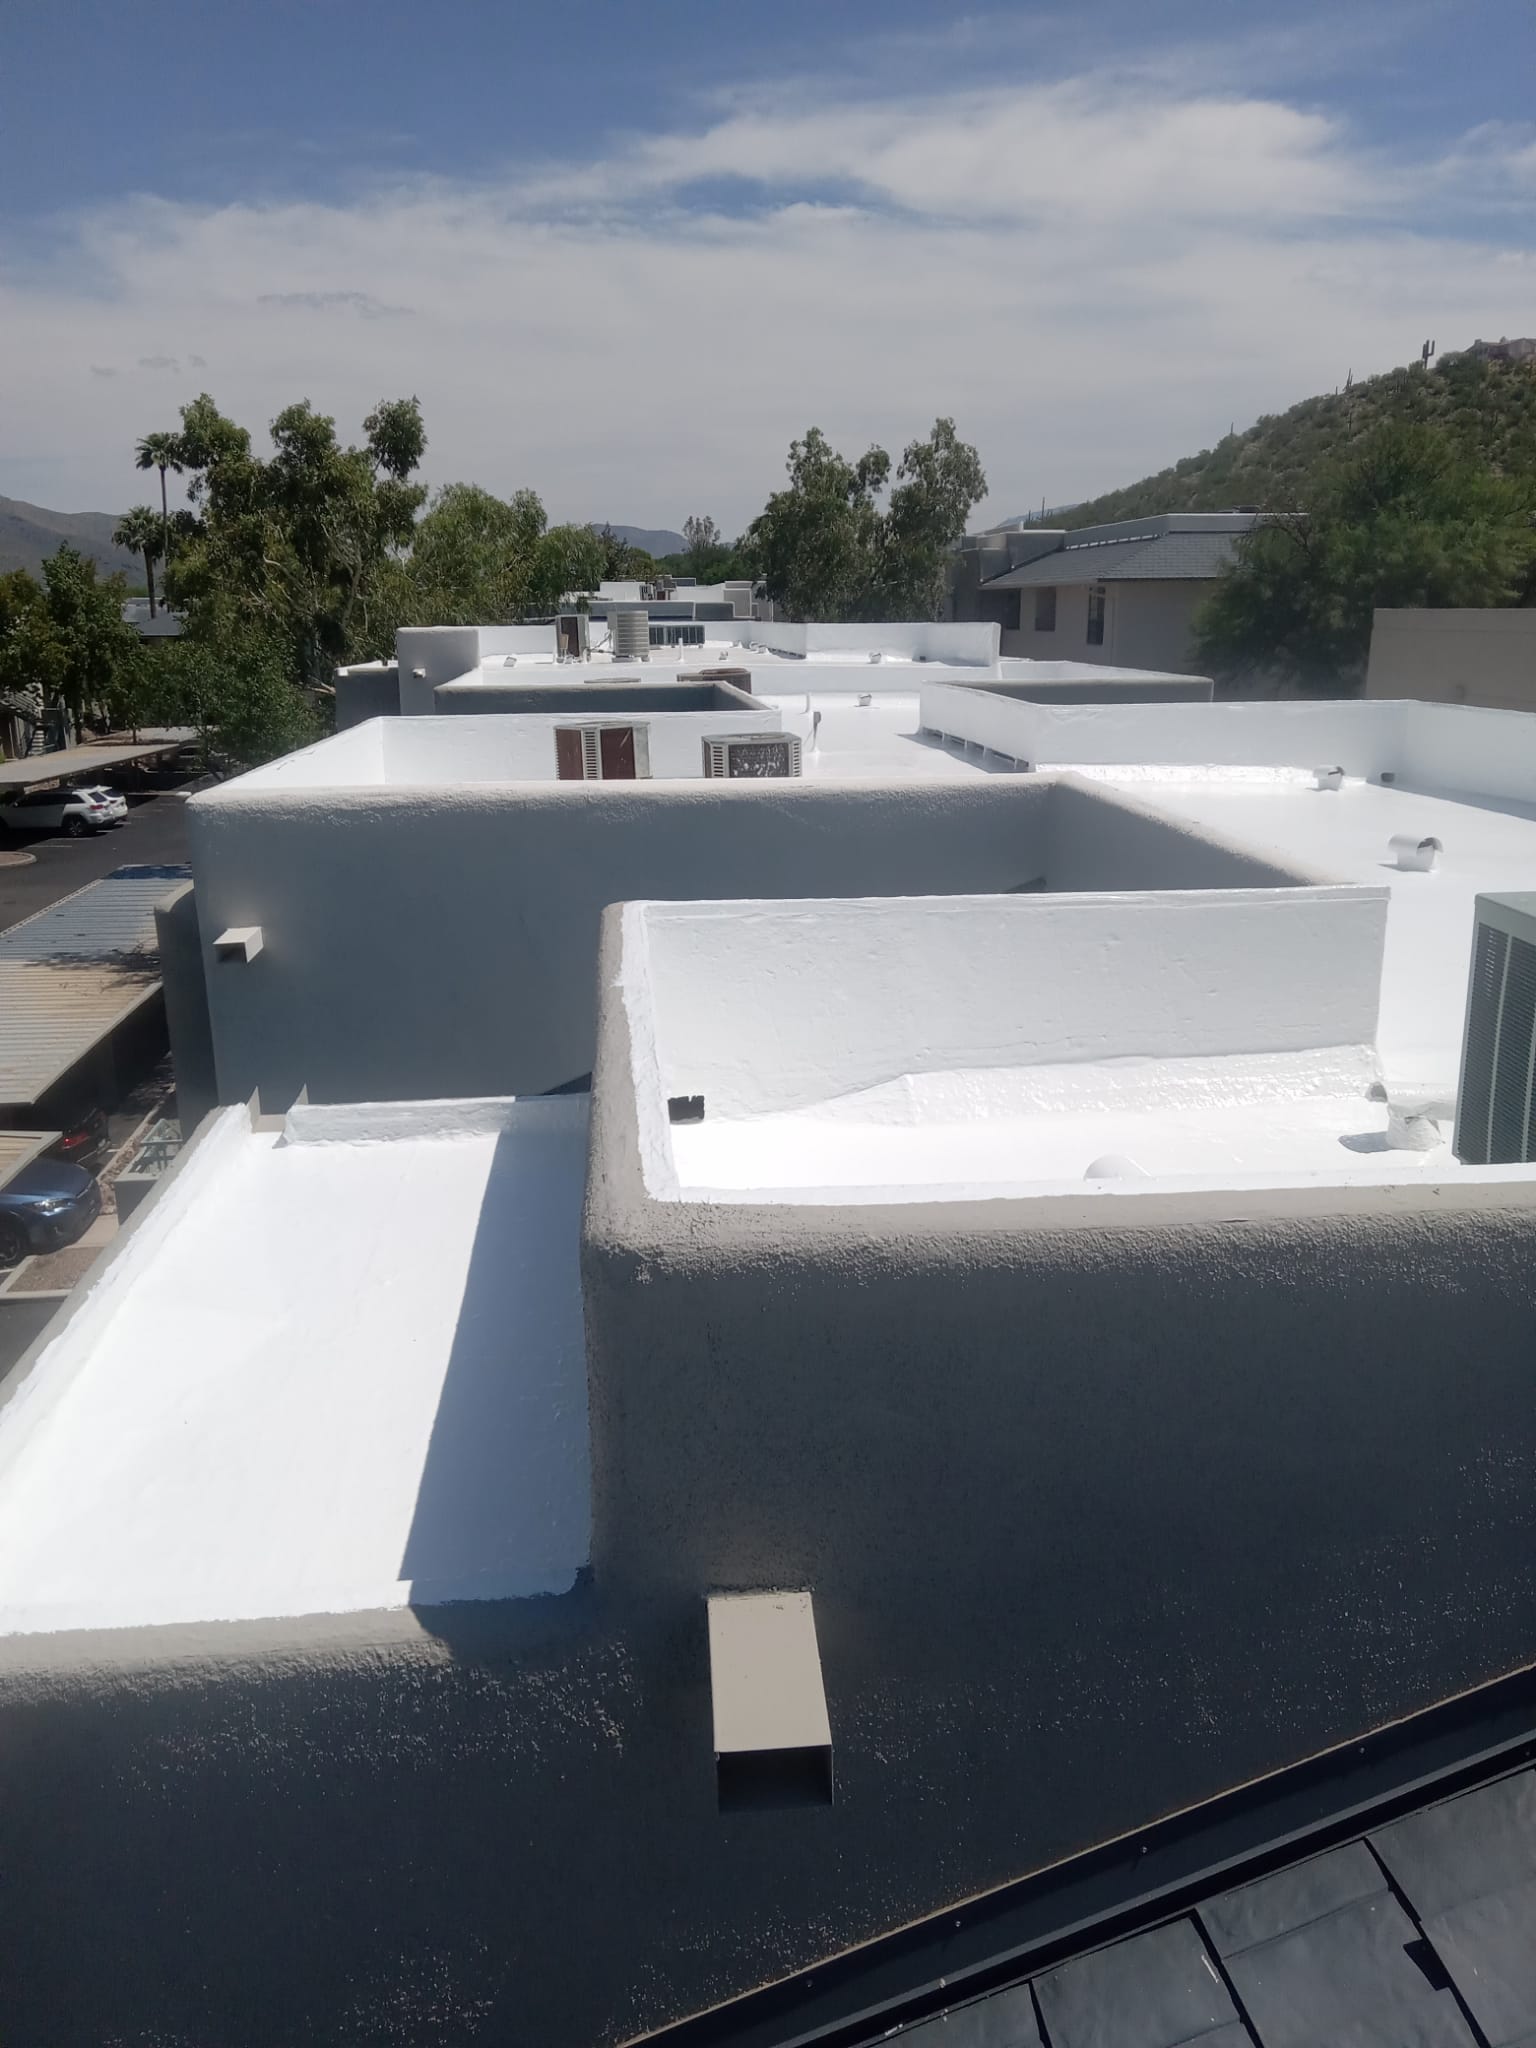 Multi-family building in Ironwood Village featuring a freshly coated spray foam roof.